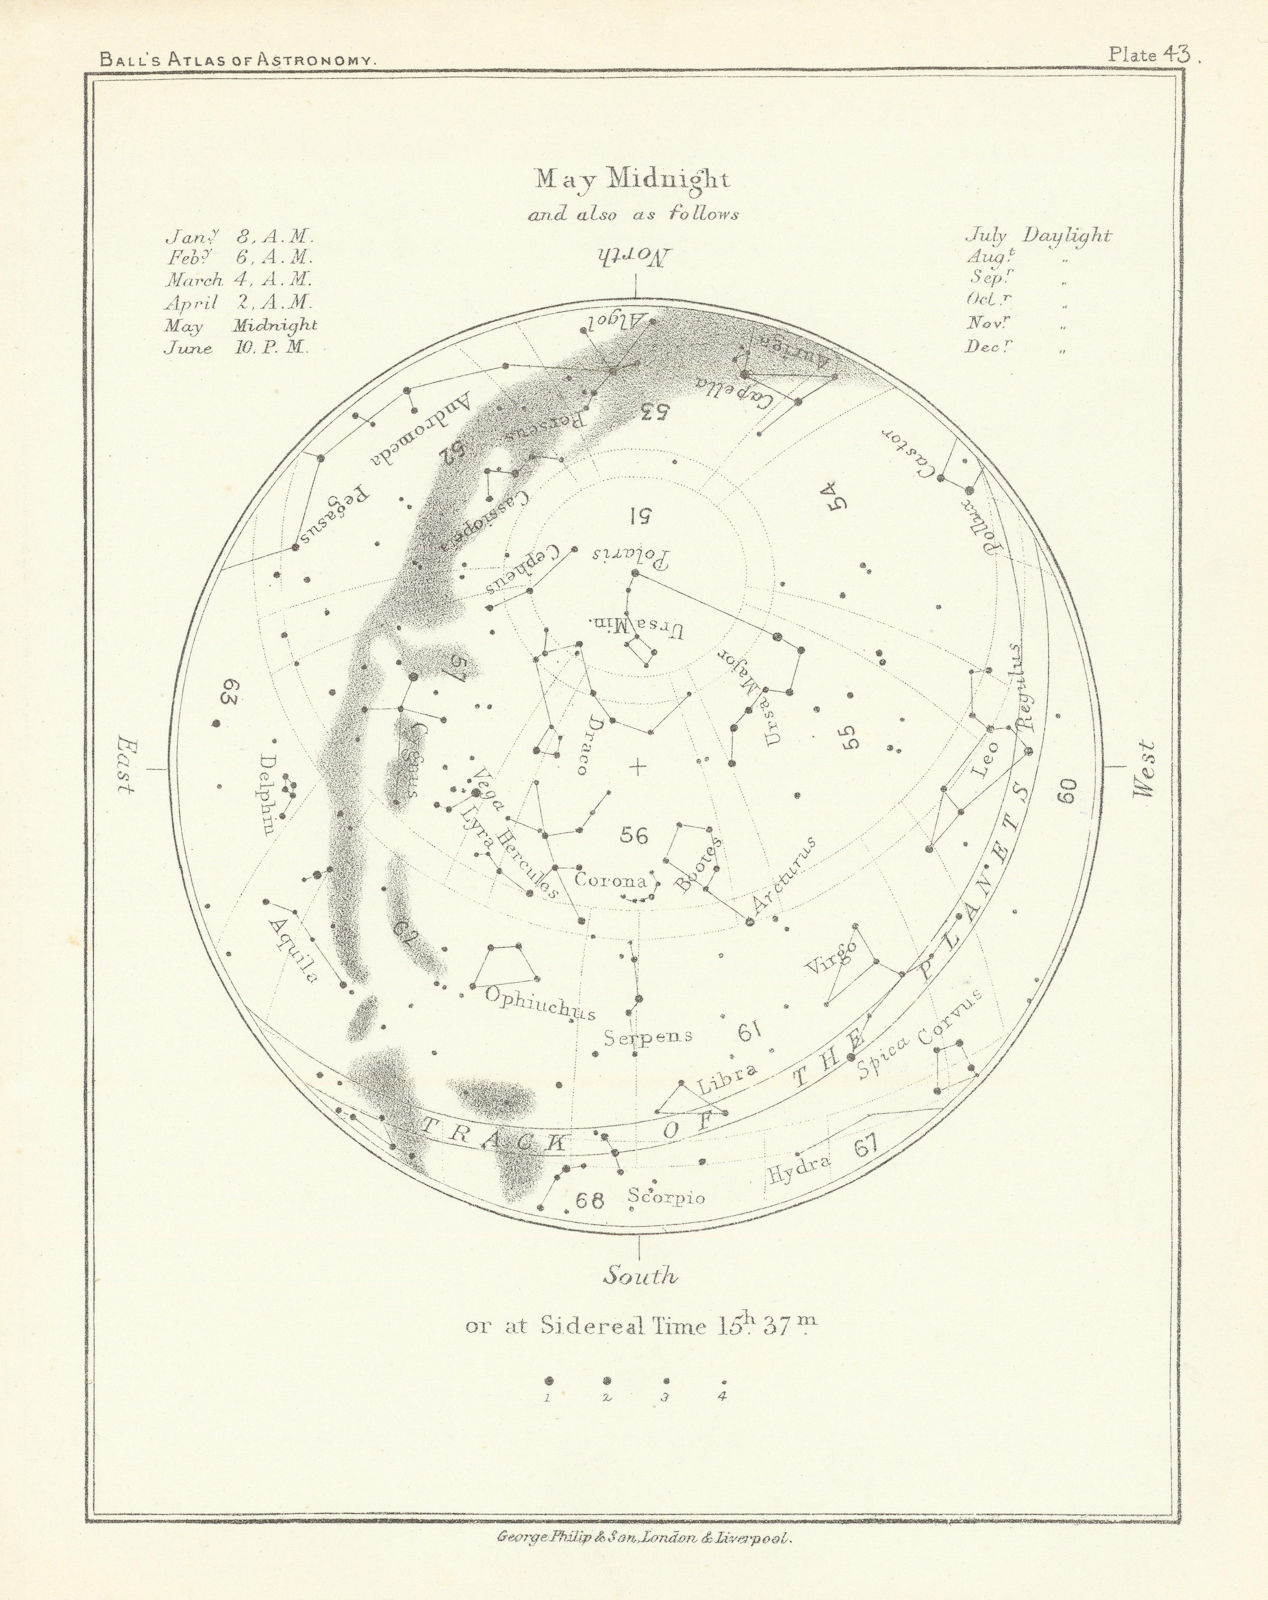 Associate Product Night Sky Star Chart - May Midnight by Robert Ball. Astronomy 1892 old map